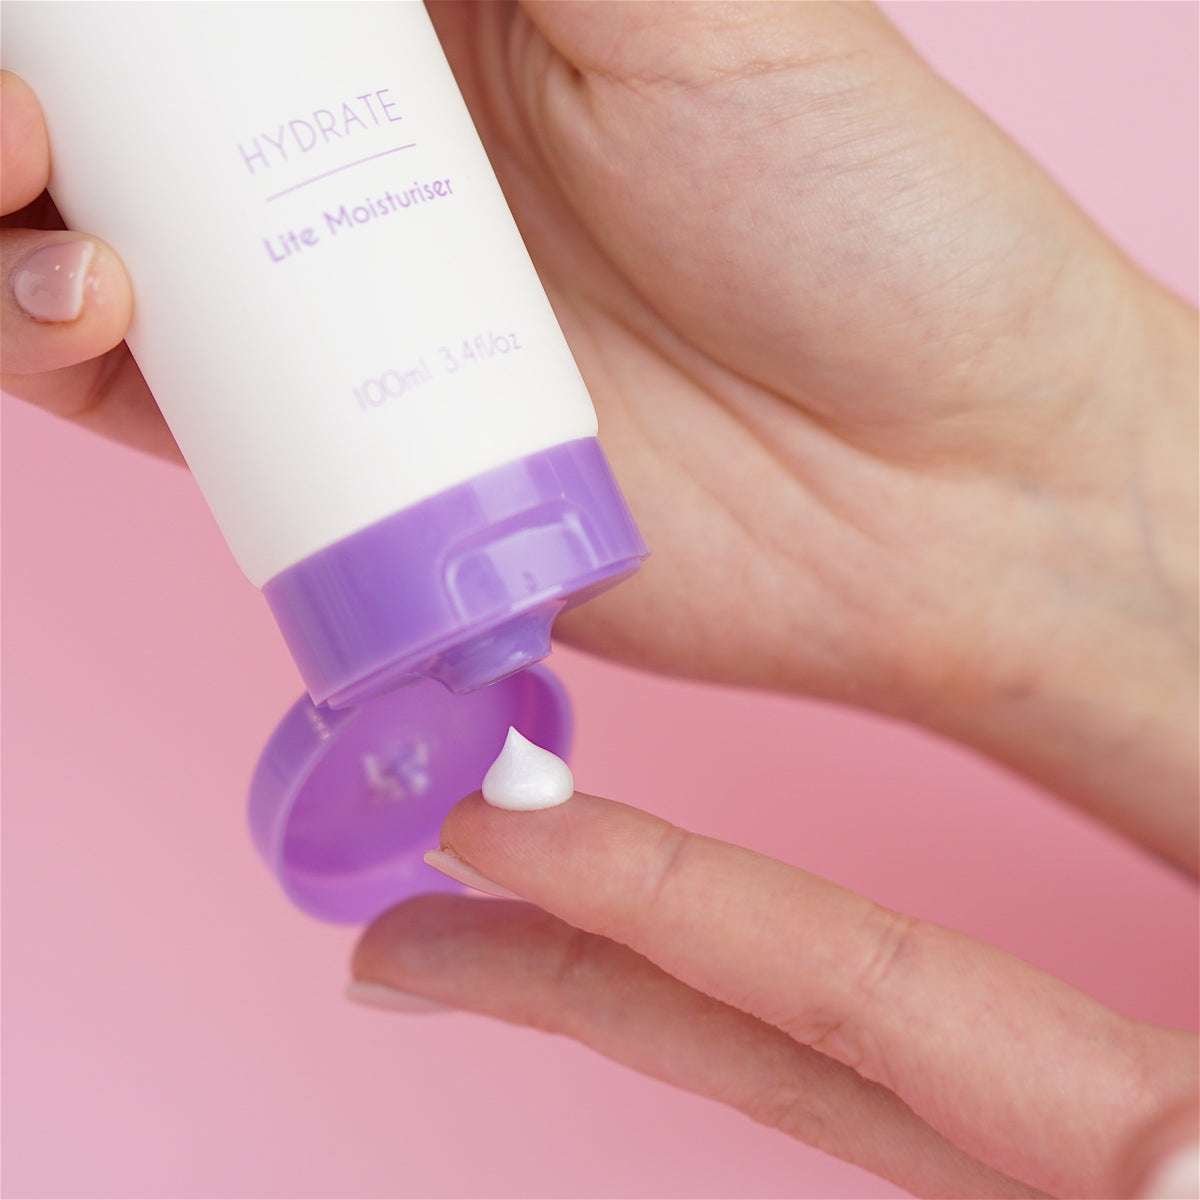 This lite moisturiser is ideal for oily and acne-prone skin